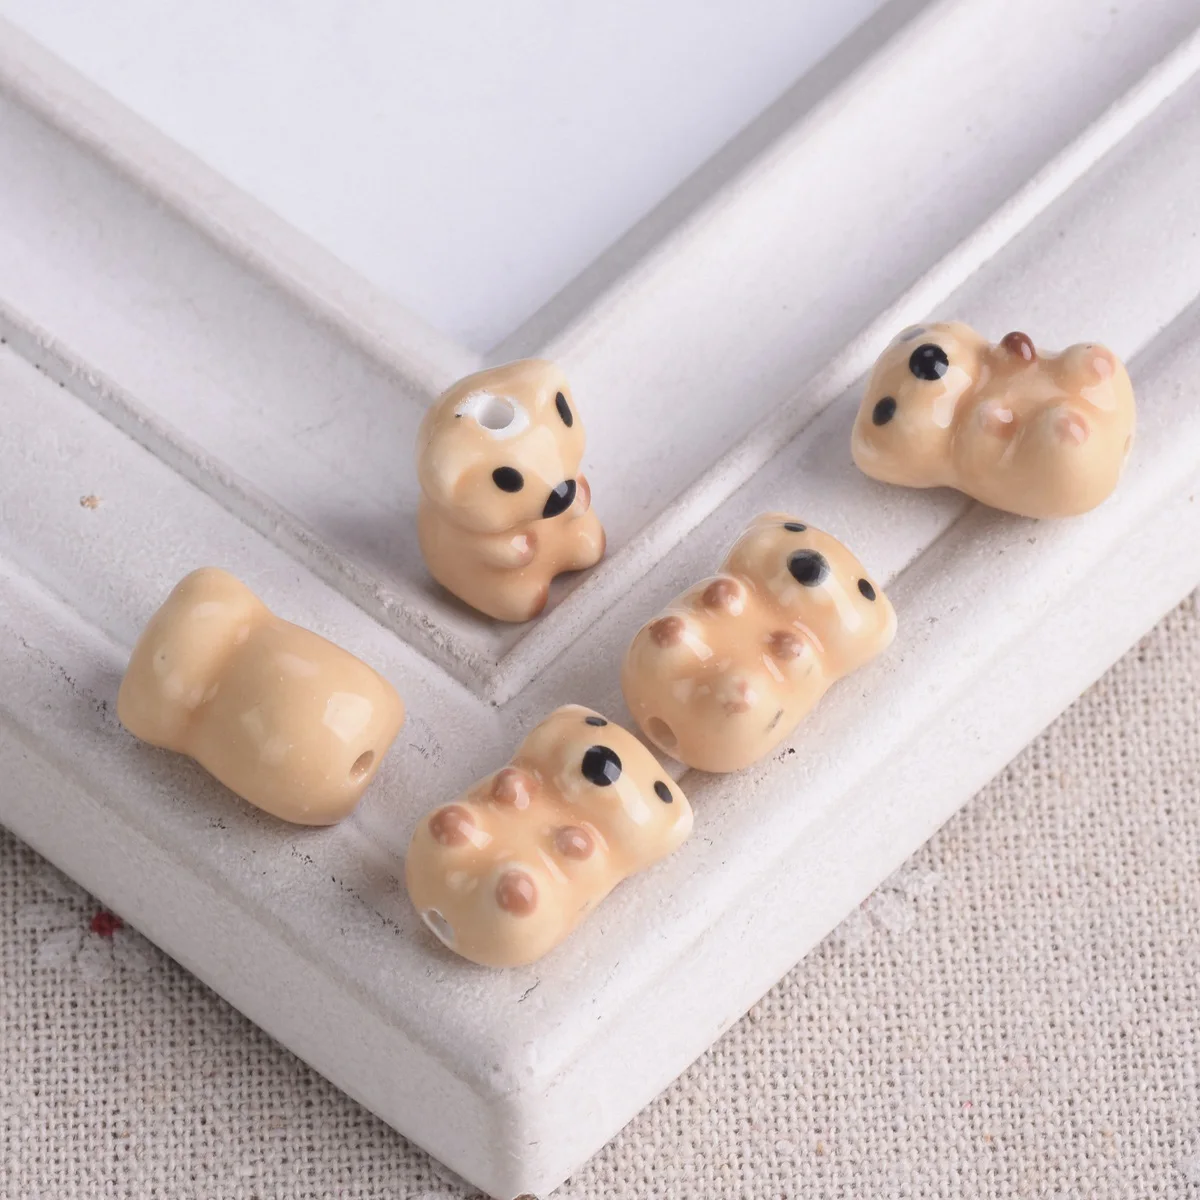 5pcs Brown Bear Shape 17x11mm Ceramic Porcelain Loose Beads For Jewelry Making DIY Craft Finndings 10pcs mb 15ak 14ak mig mag gas ceramic nozzle euro style welding gun tip nozzle shield cup for welding torch porcelain nozzle